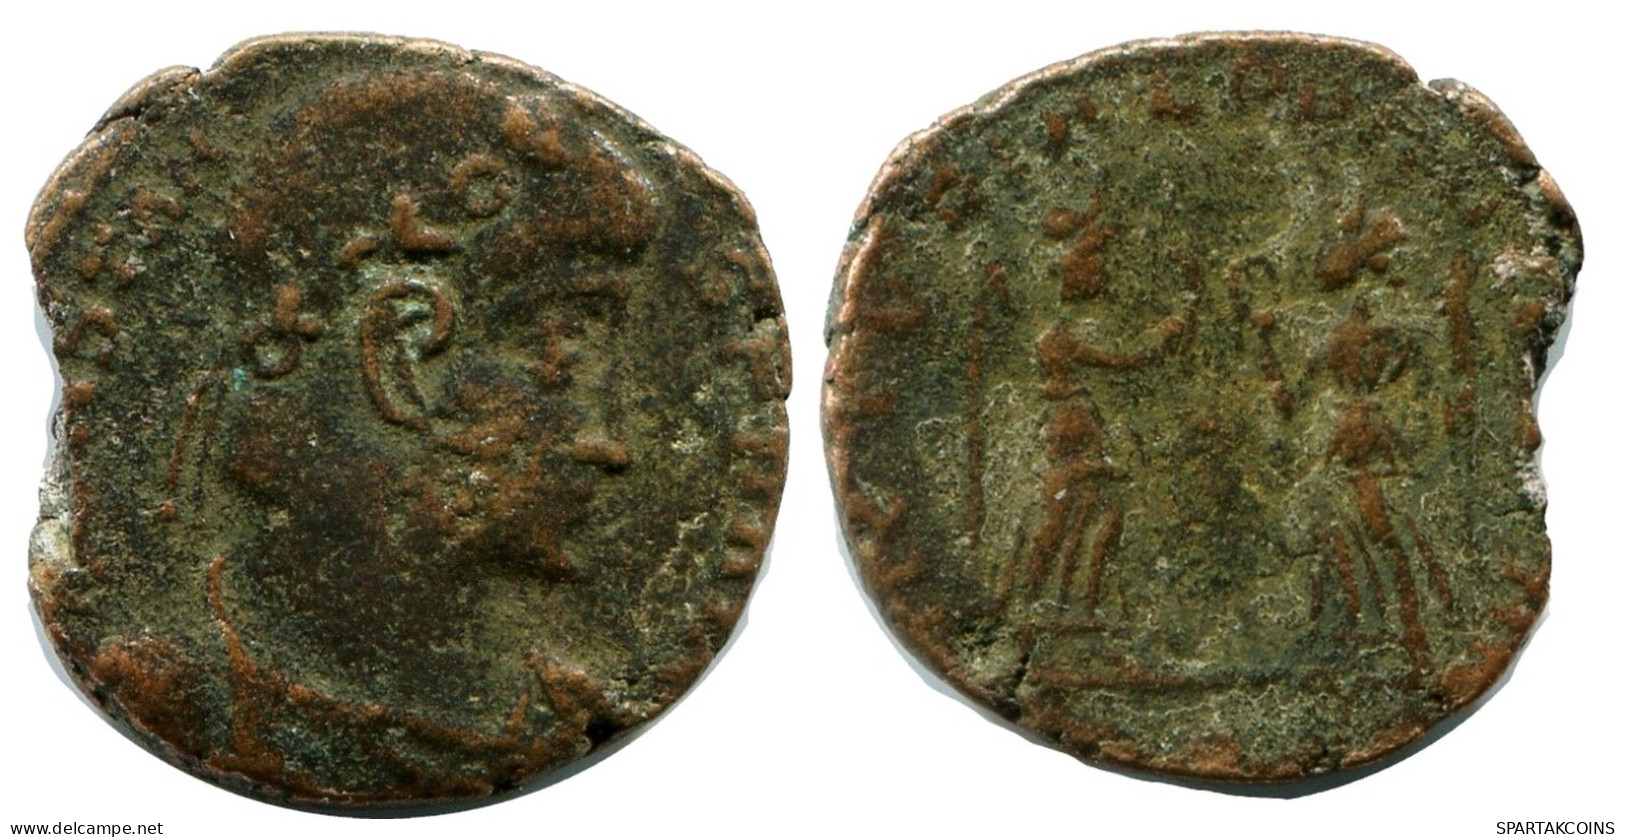 CONSTANS MINTED IN ROME ITALY FOUND IN IHNASYAH HOARD EGYPT #ANC11527.14.F.A - The Christian Empire (307 AD Tot 363 AD)